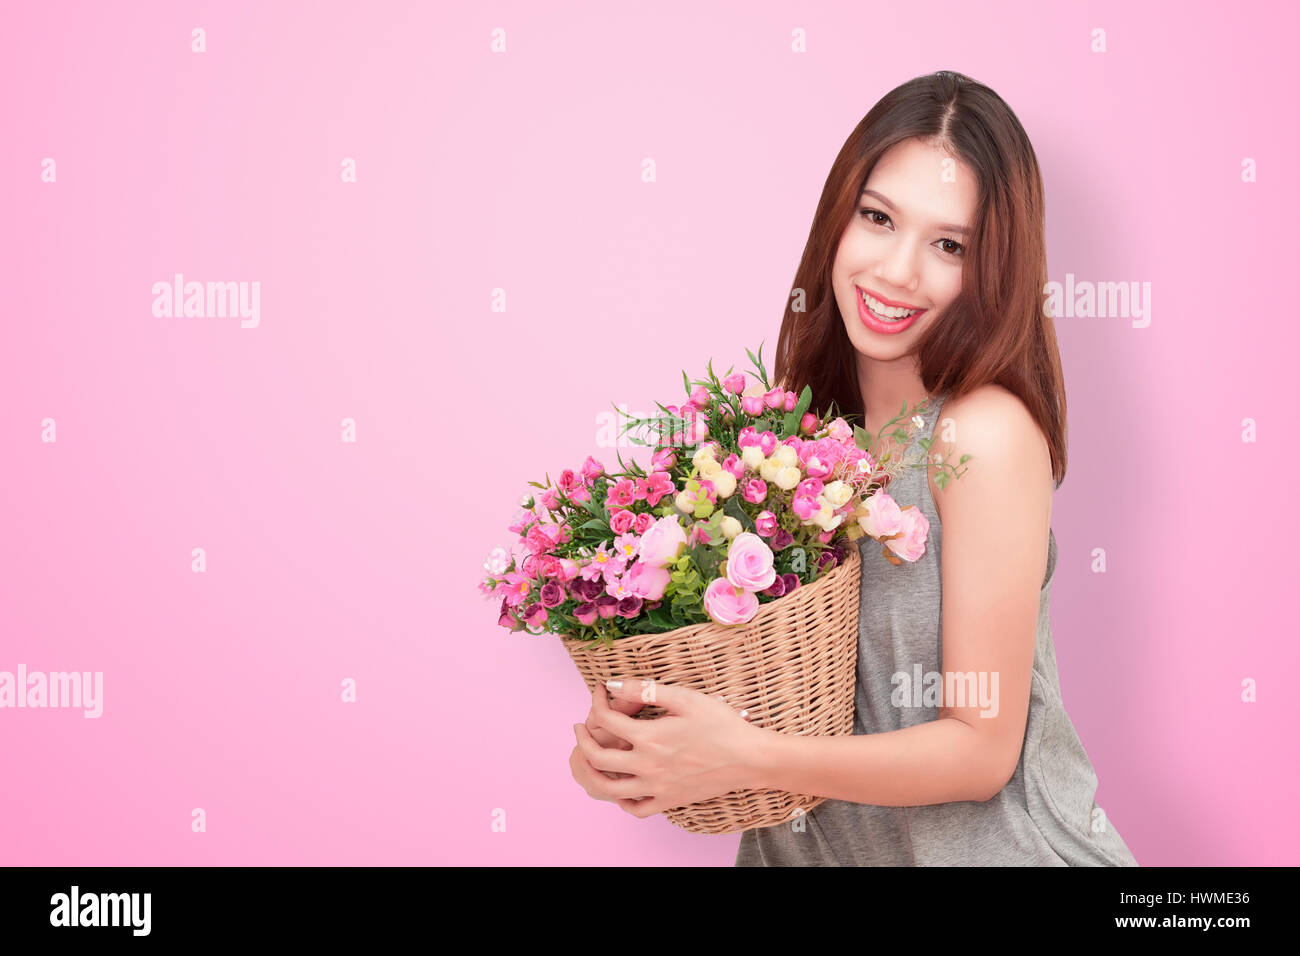 Girl holding a basket of flowers.  Isolated on white. Stock Photo